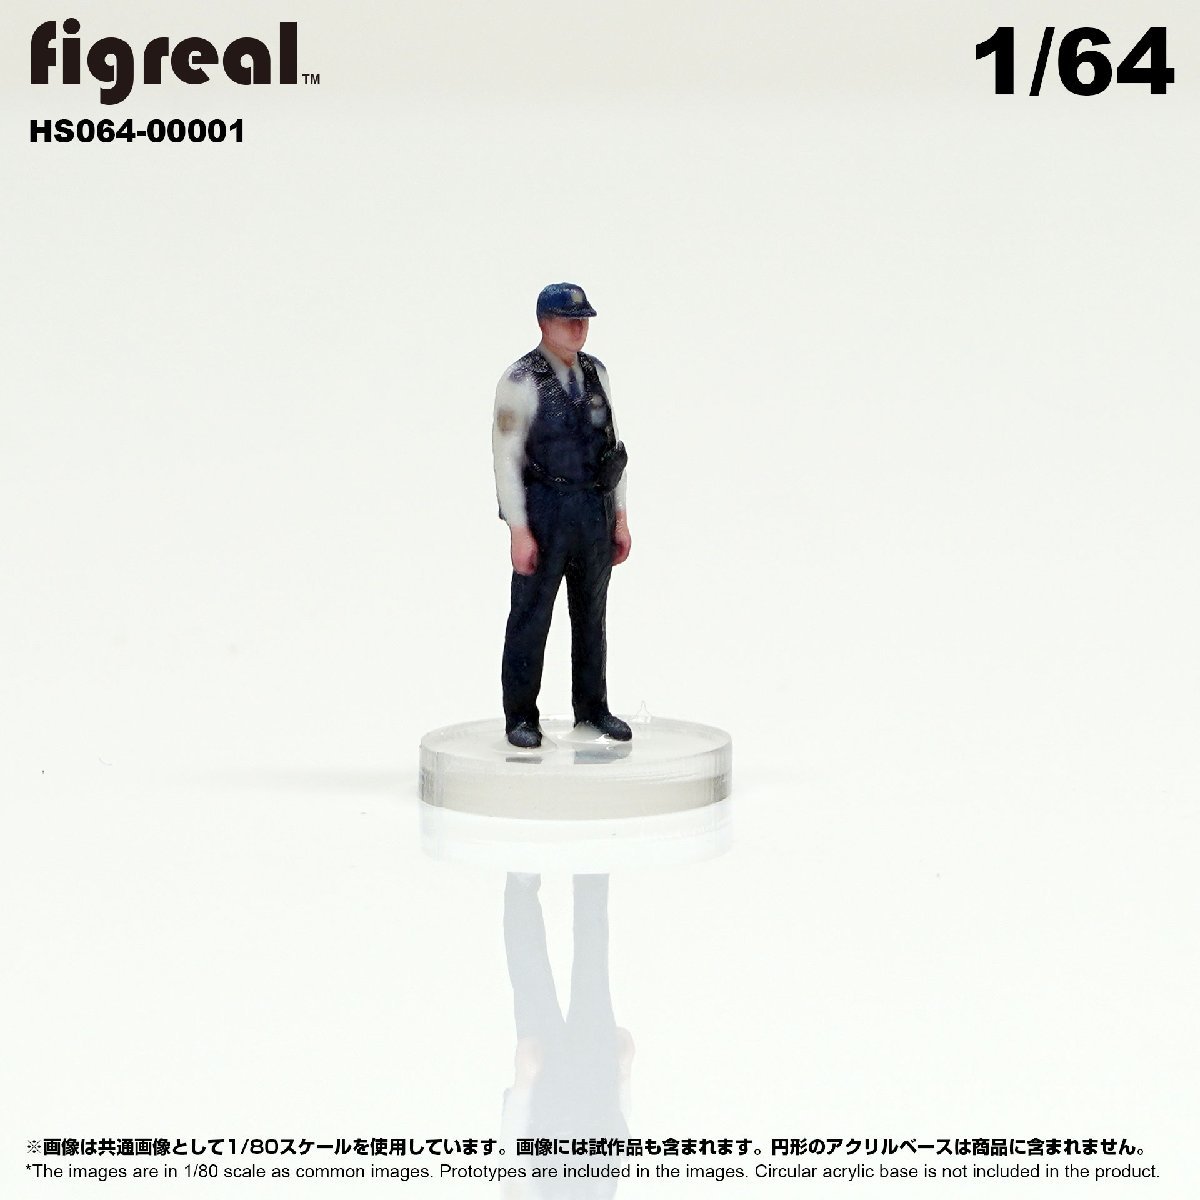 HS064-00001 figreal 日本警察官 1/64 高精細フィギュア_画像2